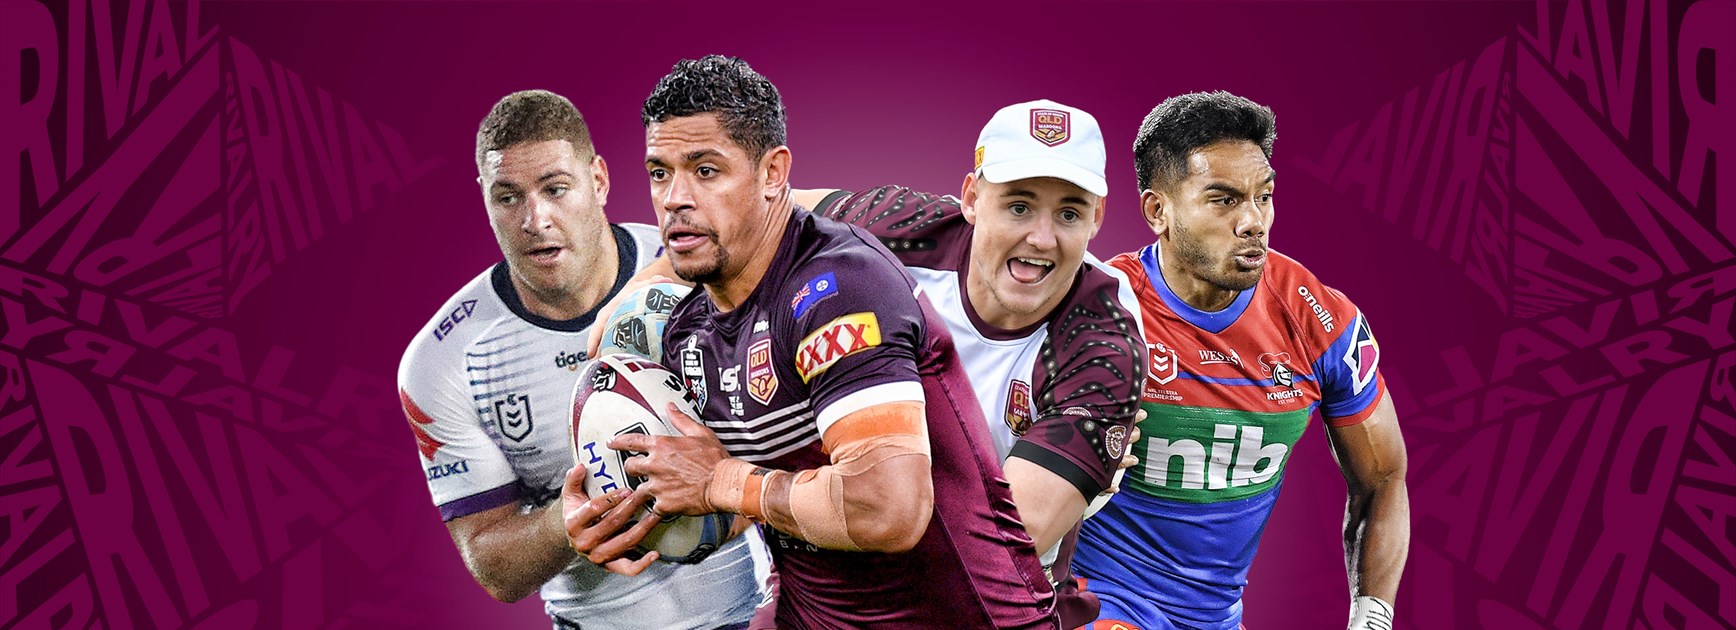 Ranking the Maroons backs candidates for 2020 Origin